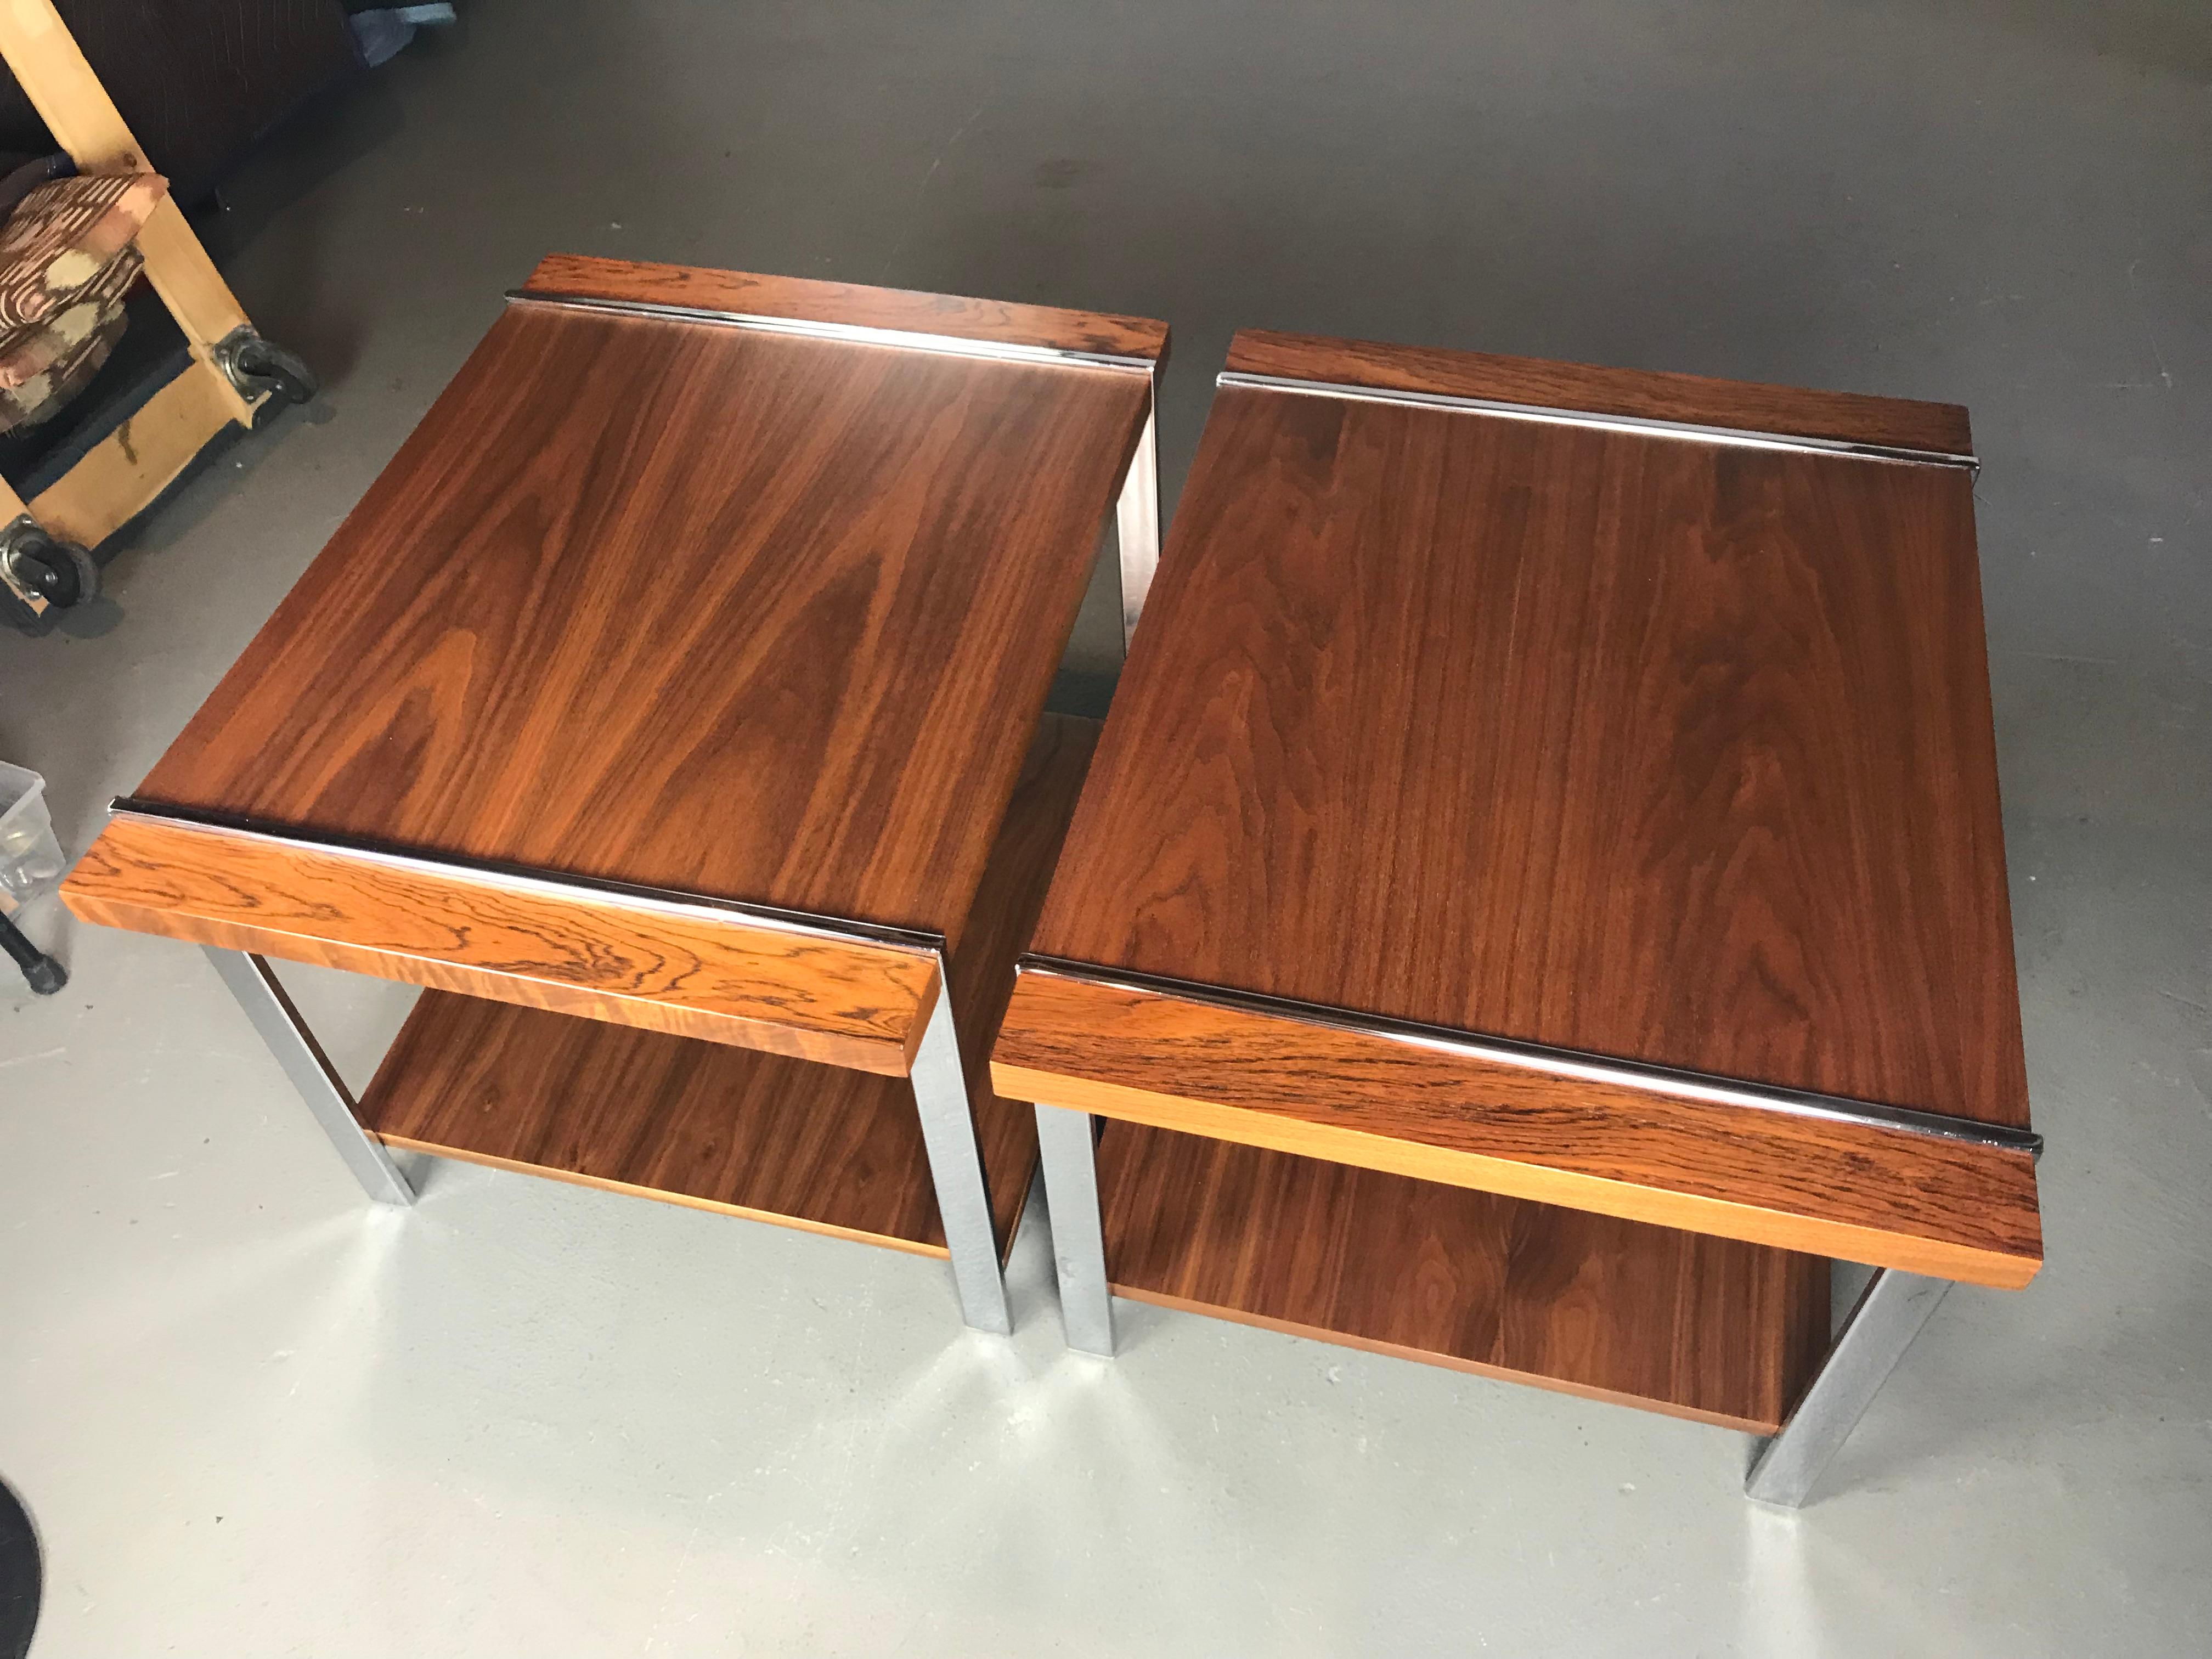 Very nice pair of Mid-Century Modern end tables by Lane. Made of rosewood, walnut & chrome. The tables have been refinished. Very light signs of use on the chrome. Nice chrome frames that show the wood planks jutting through. 

28 x 22 x 20